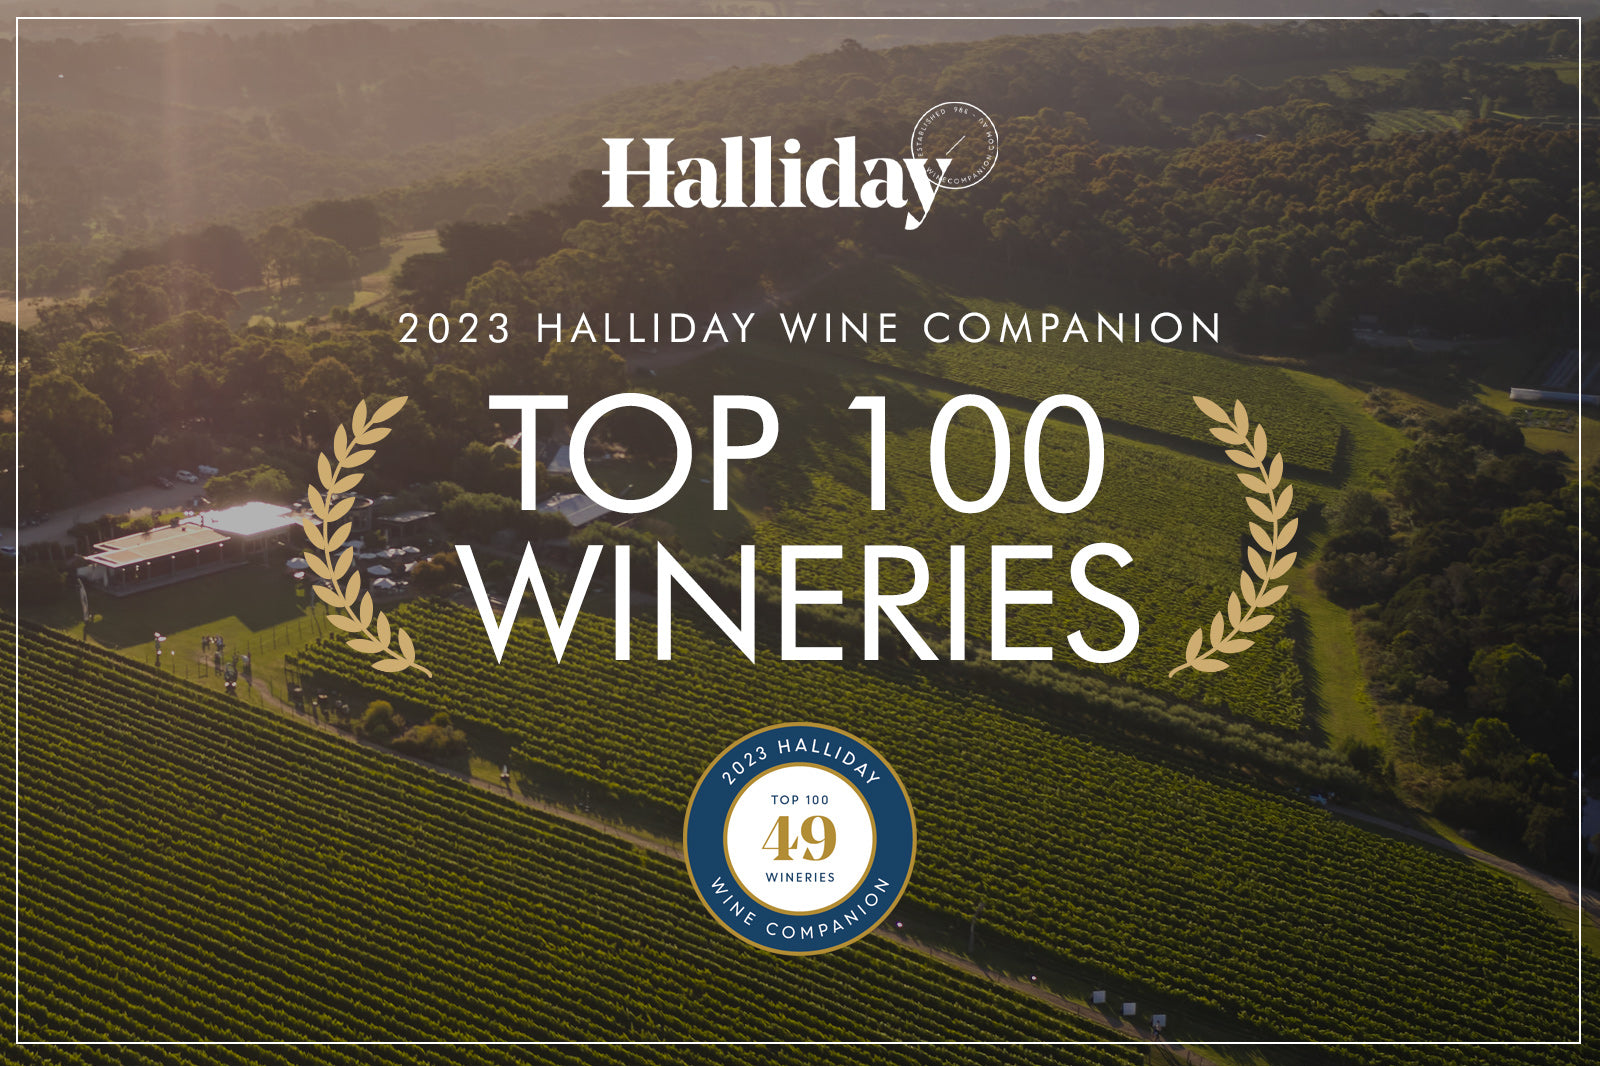 JUST ANNOUNCED: Montalto recognised in 2023 Halliday Wine Companion’s Top 100 Wineries!